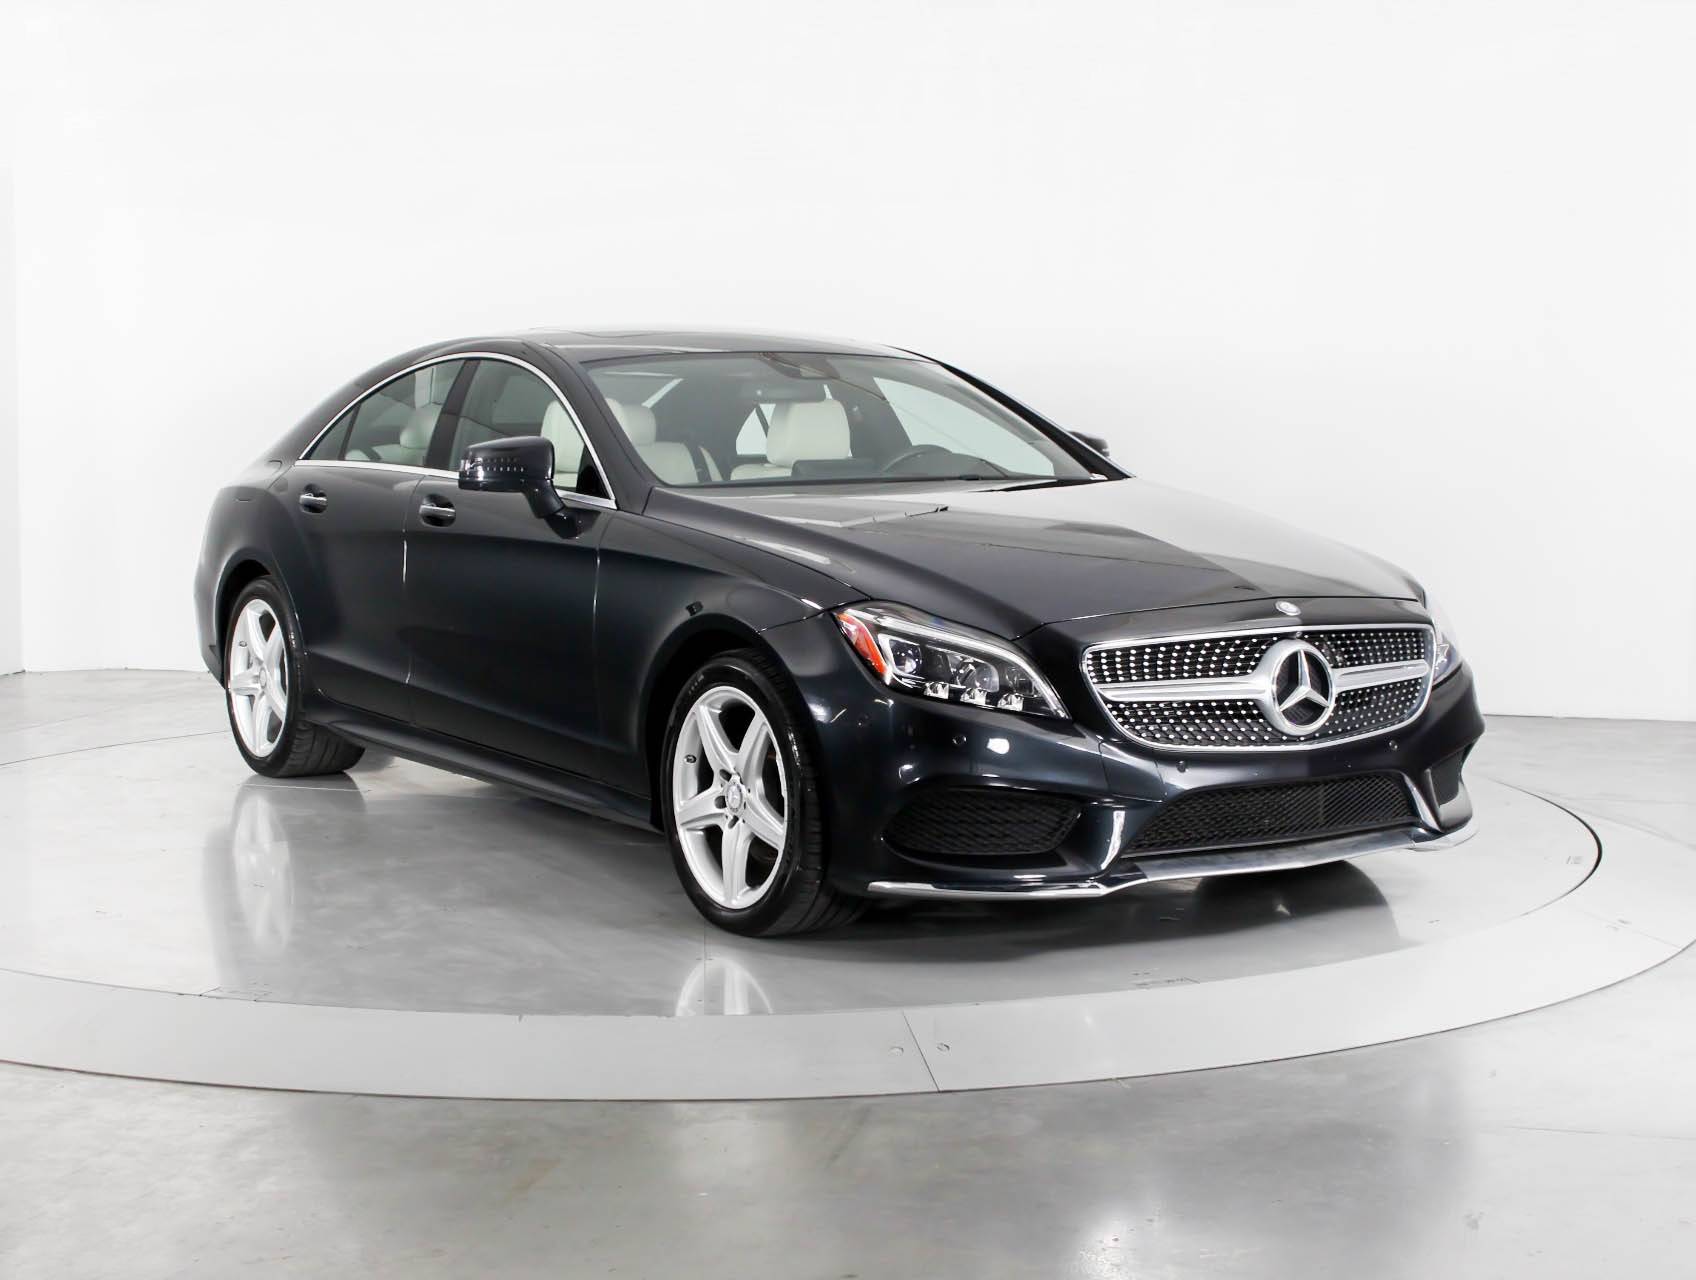 Florida Fine Cars - Used MERCEDES-BENZ CLS CLASS 2015 WEST PALM CLS400 4MATIC